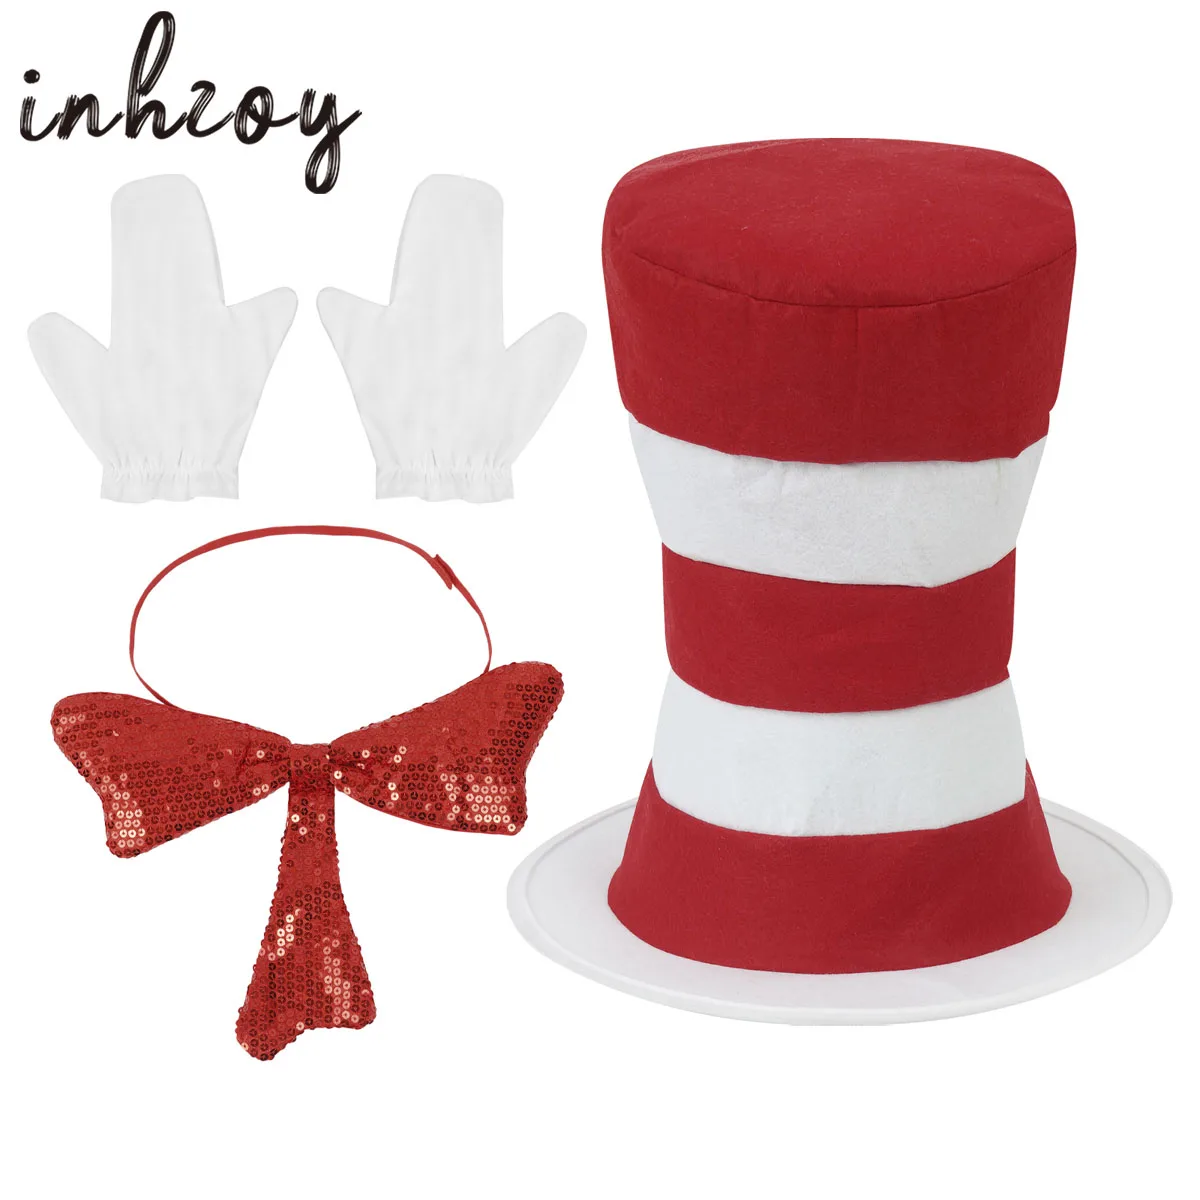 Cat in the Hat Kit Gloves Bow Tie Dr Seuss Halloween Adult Costume Accessory 